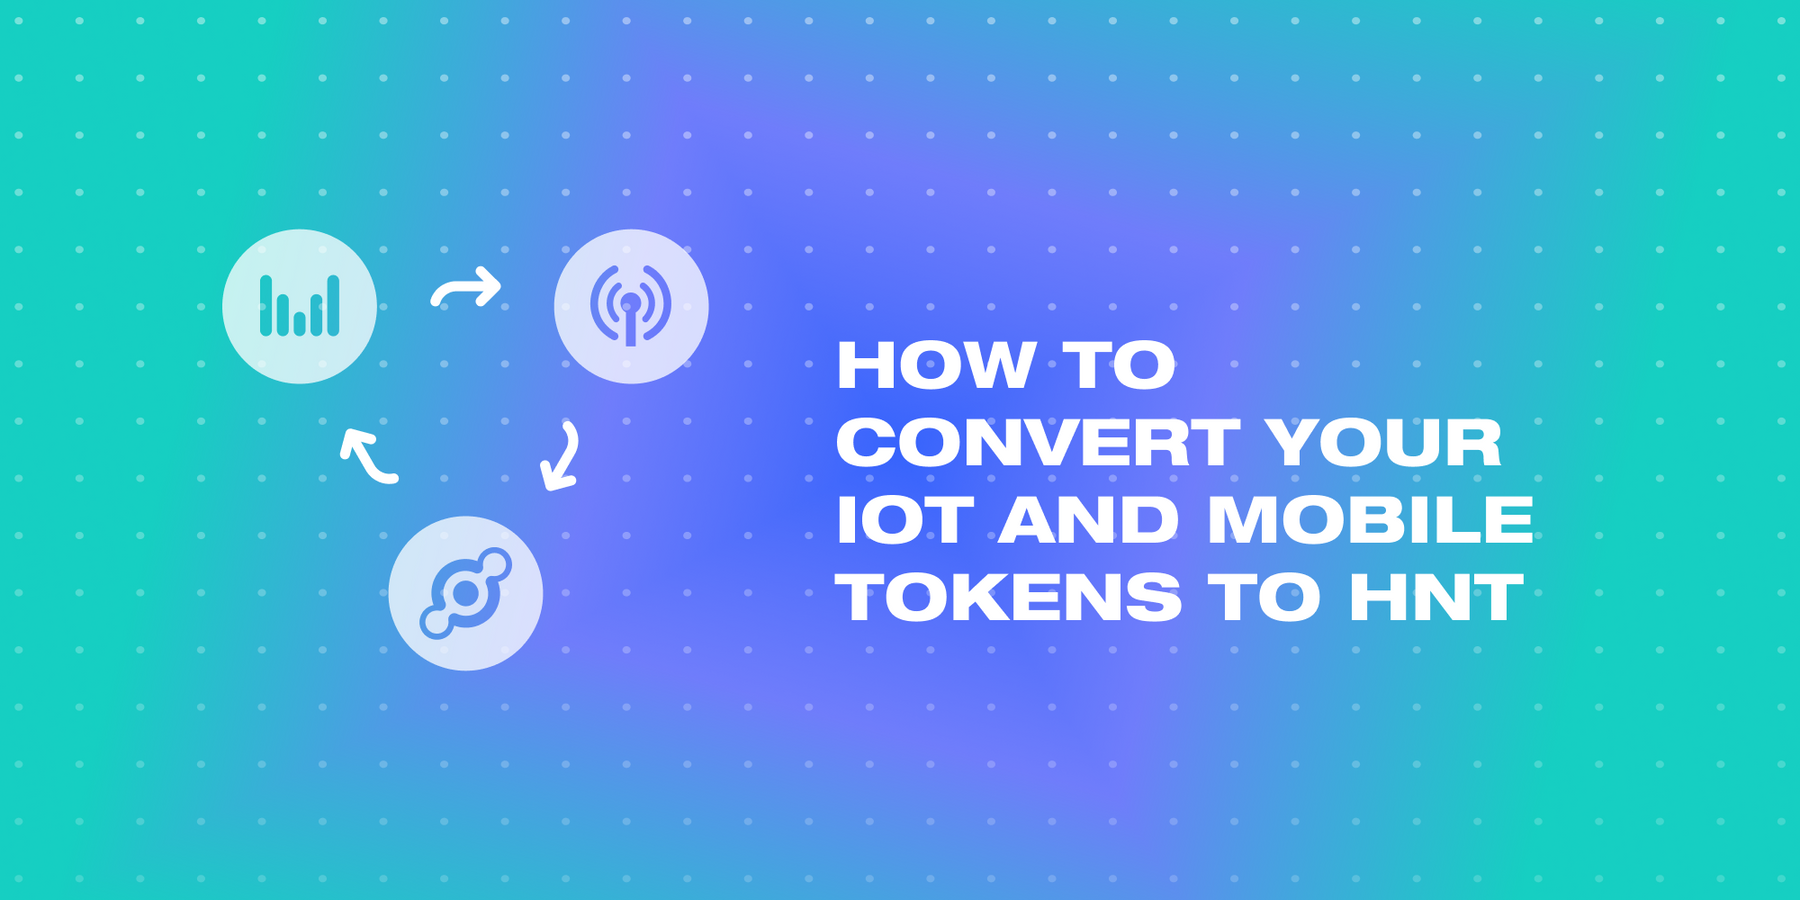 How to convert your IoT and MOBILE tokens to HNT